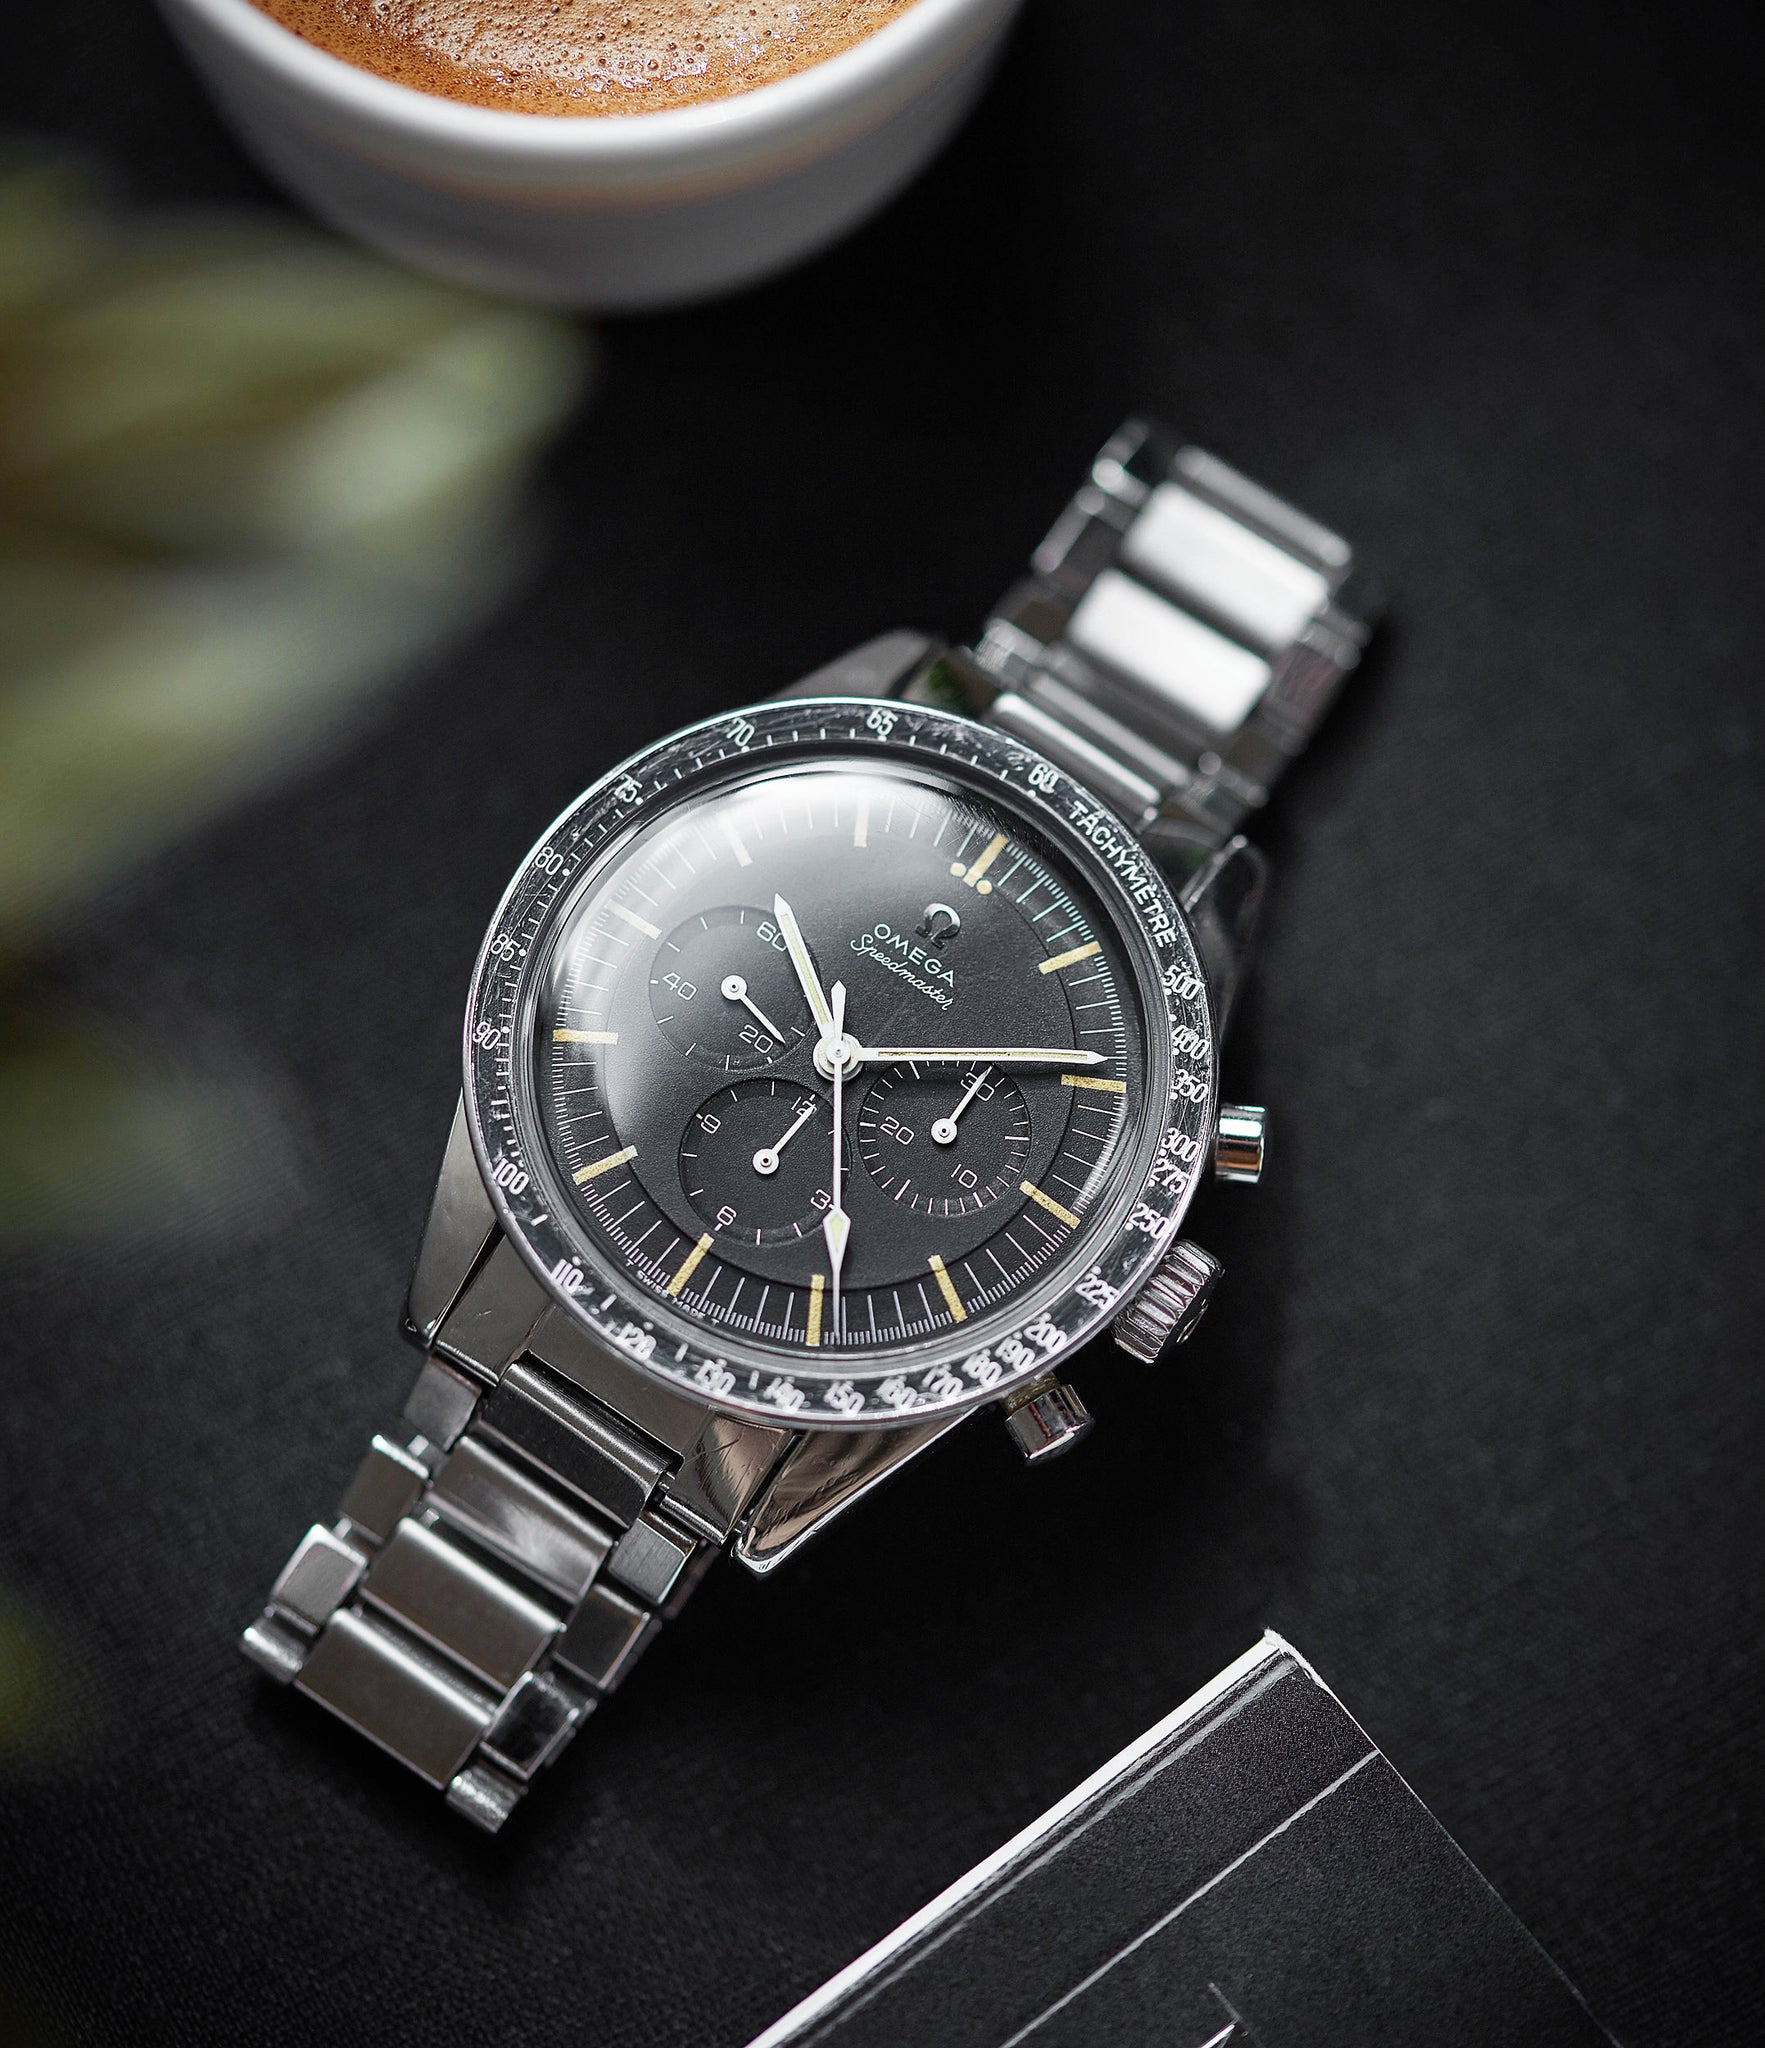 Speedmaster pre-professional Ed White Omega 105.003-65 steel chronograph sports watch online at A Collected Man London